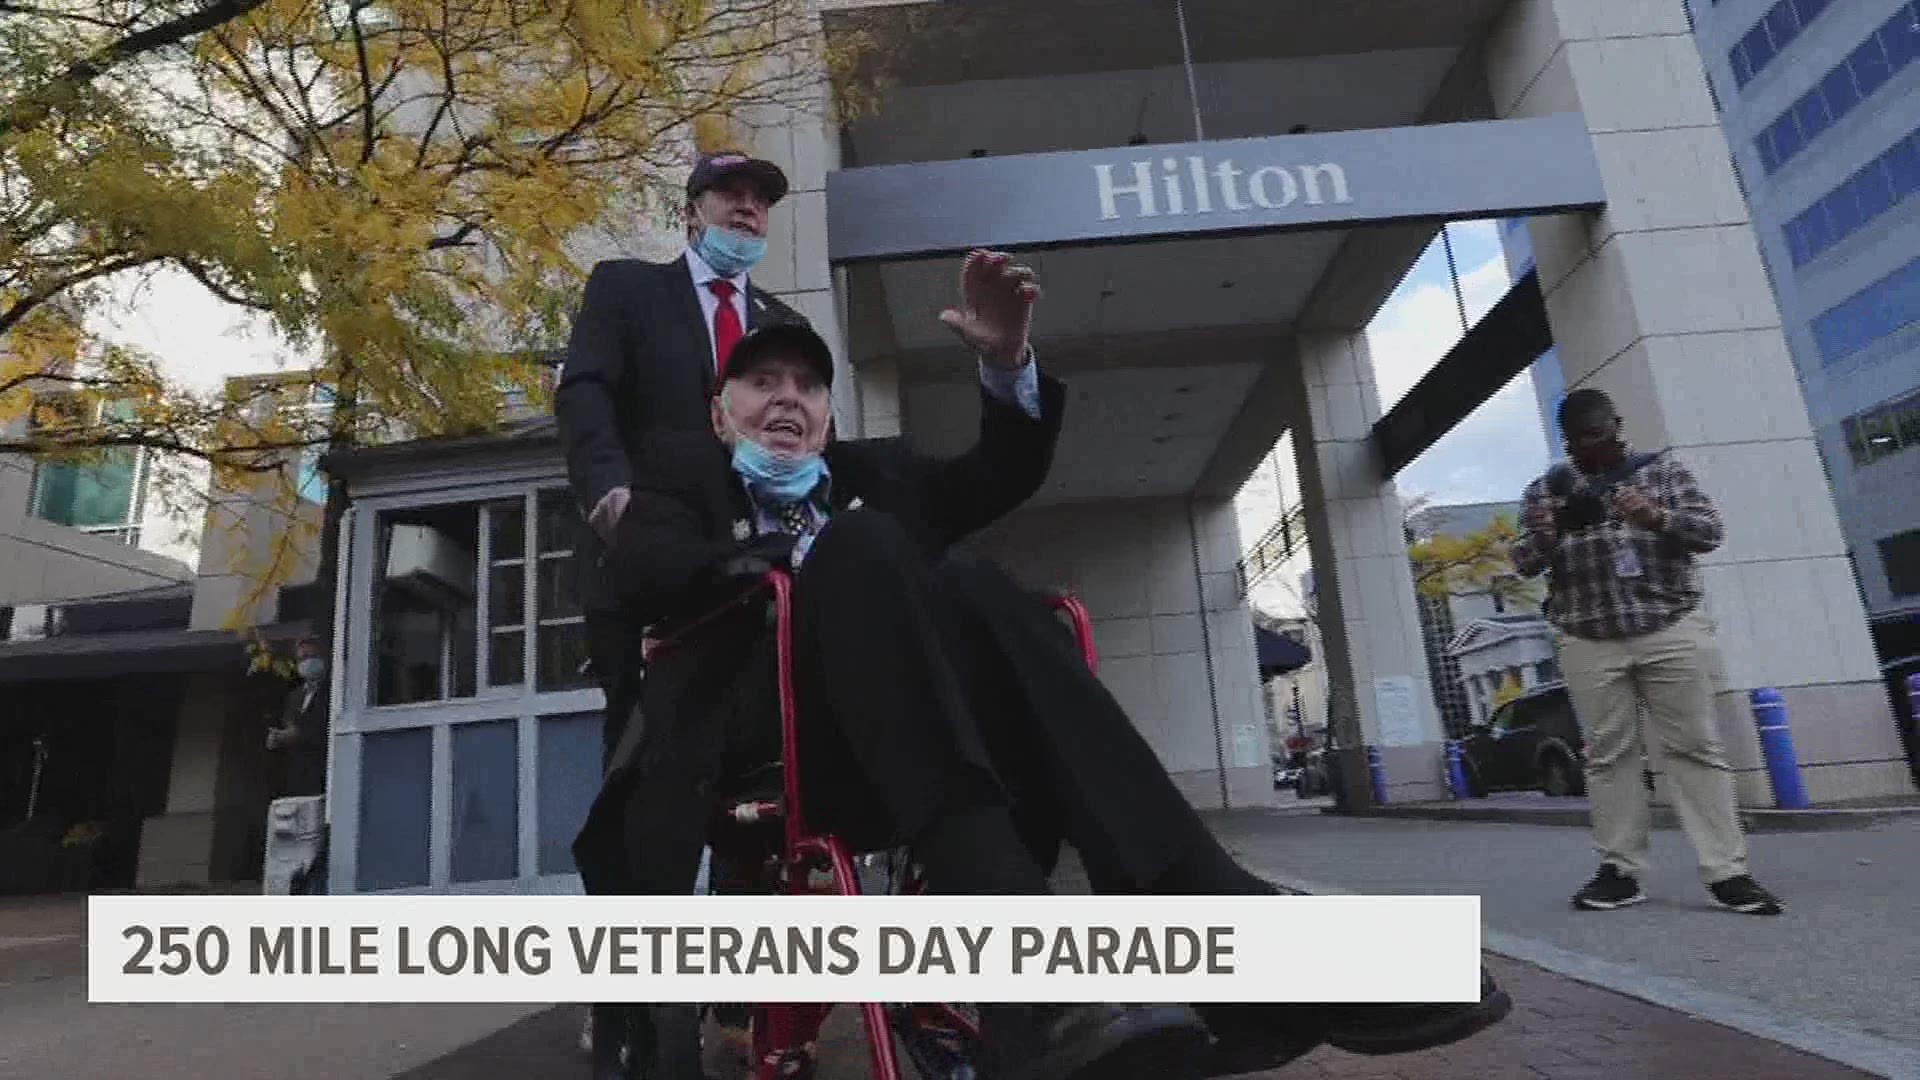 A final tribute from one veteran to others in what could be the nation's longest COVID-19 safe Veterans Day parade.